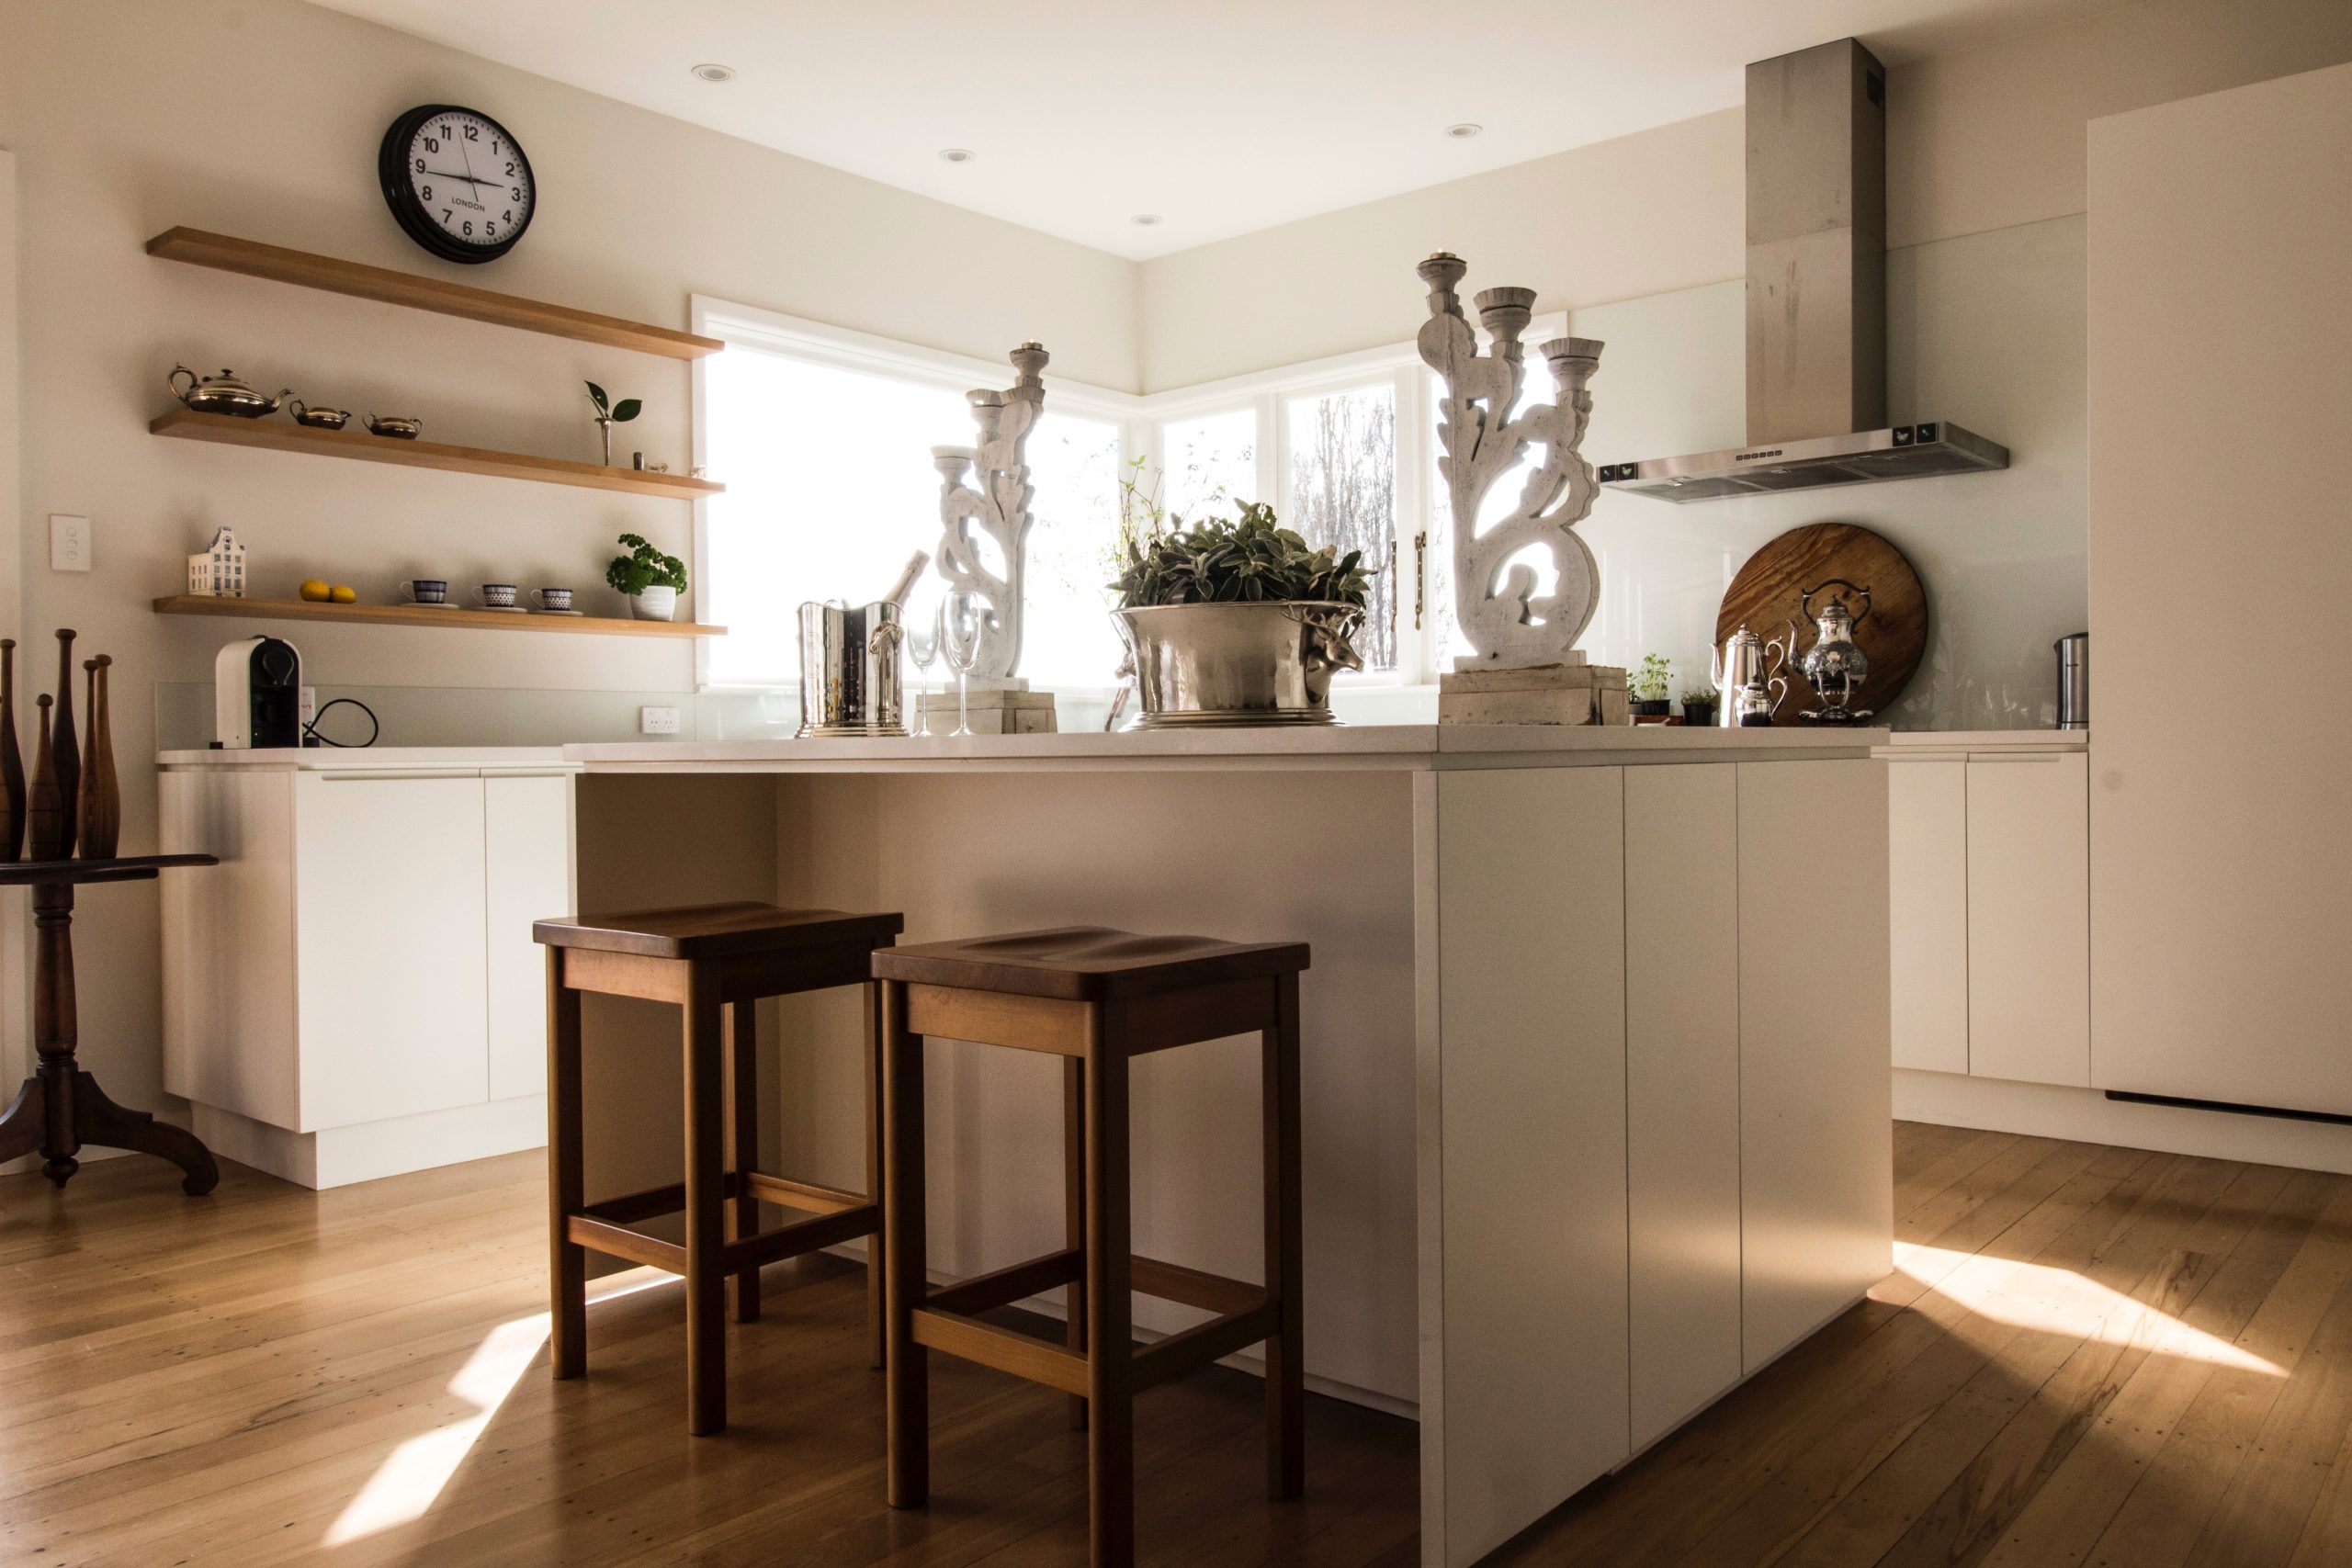 Get to Know Kitchen Design Like a Professional: Part 2